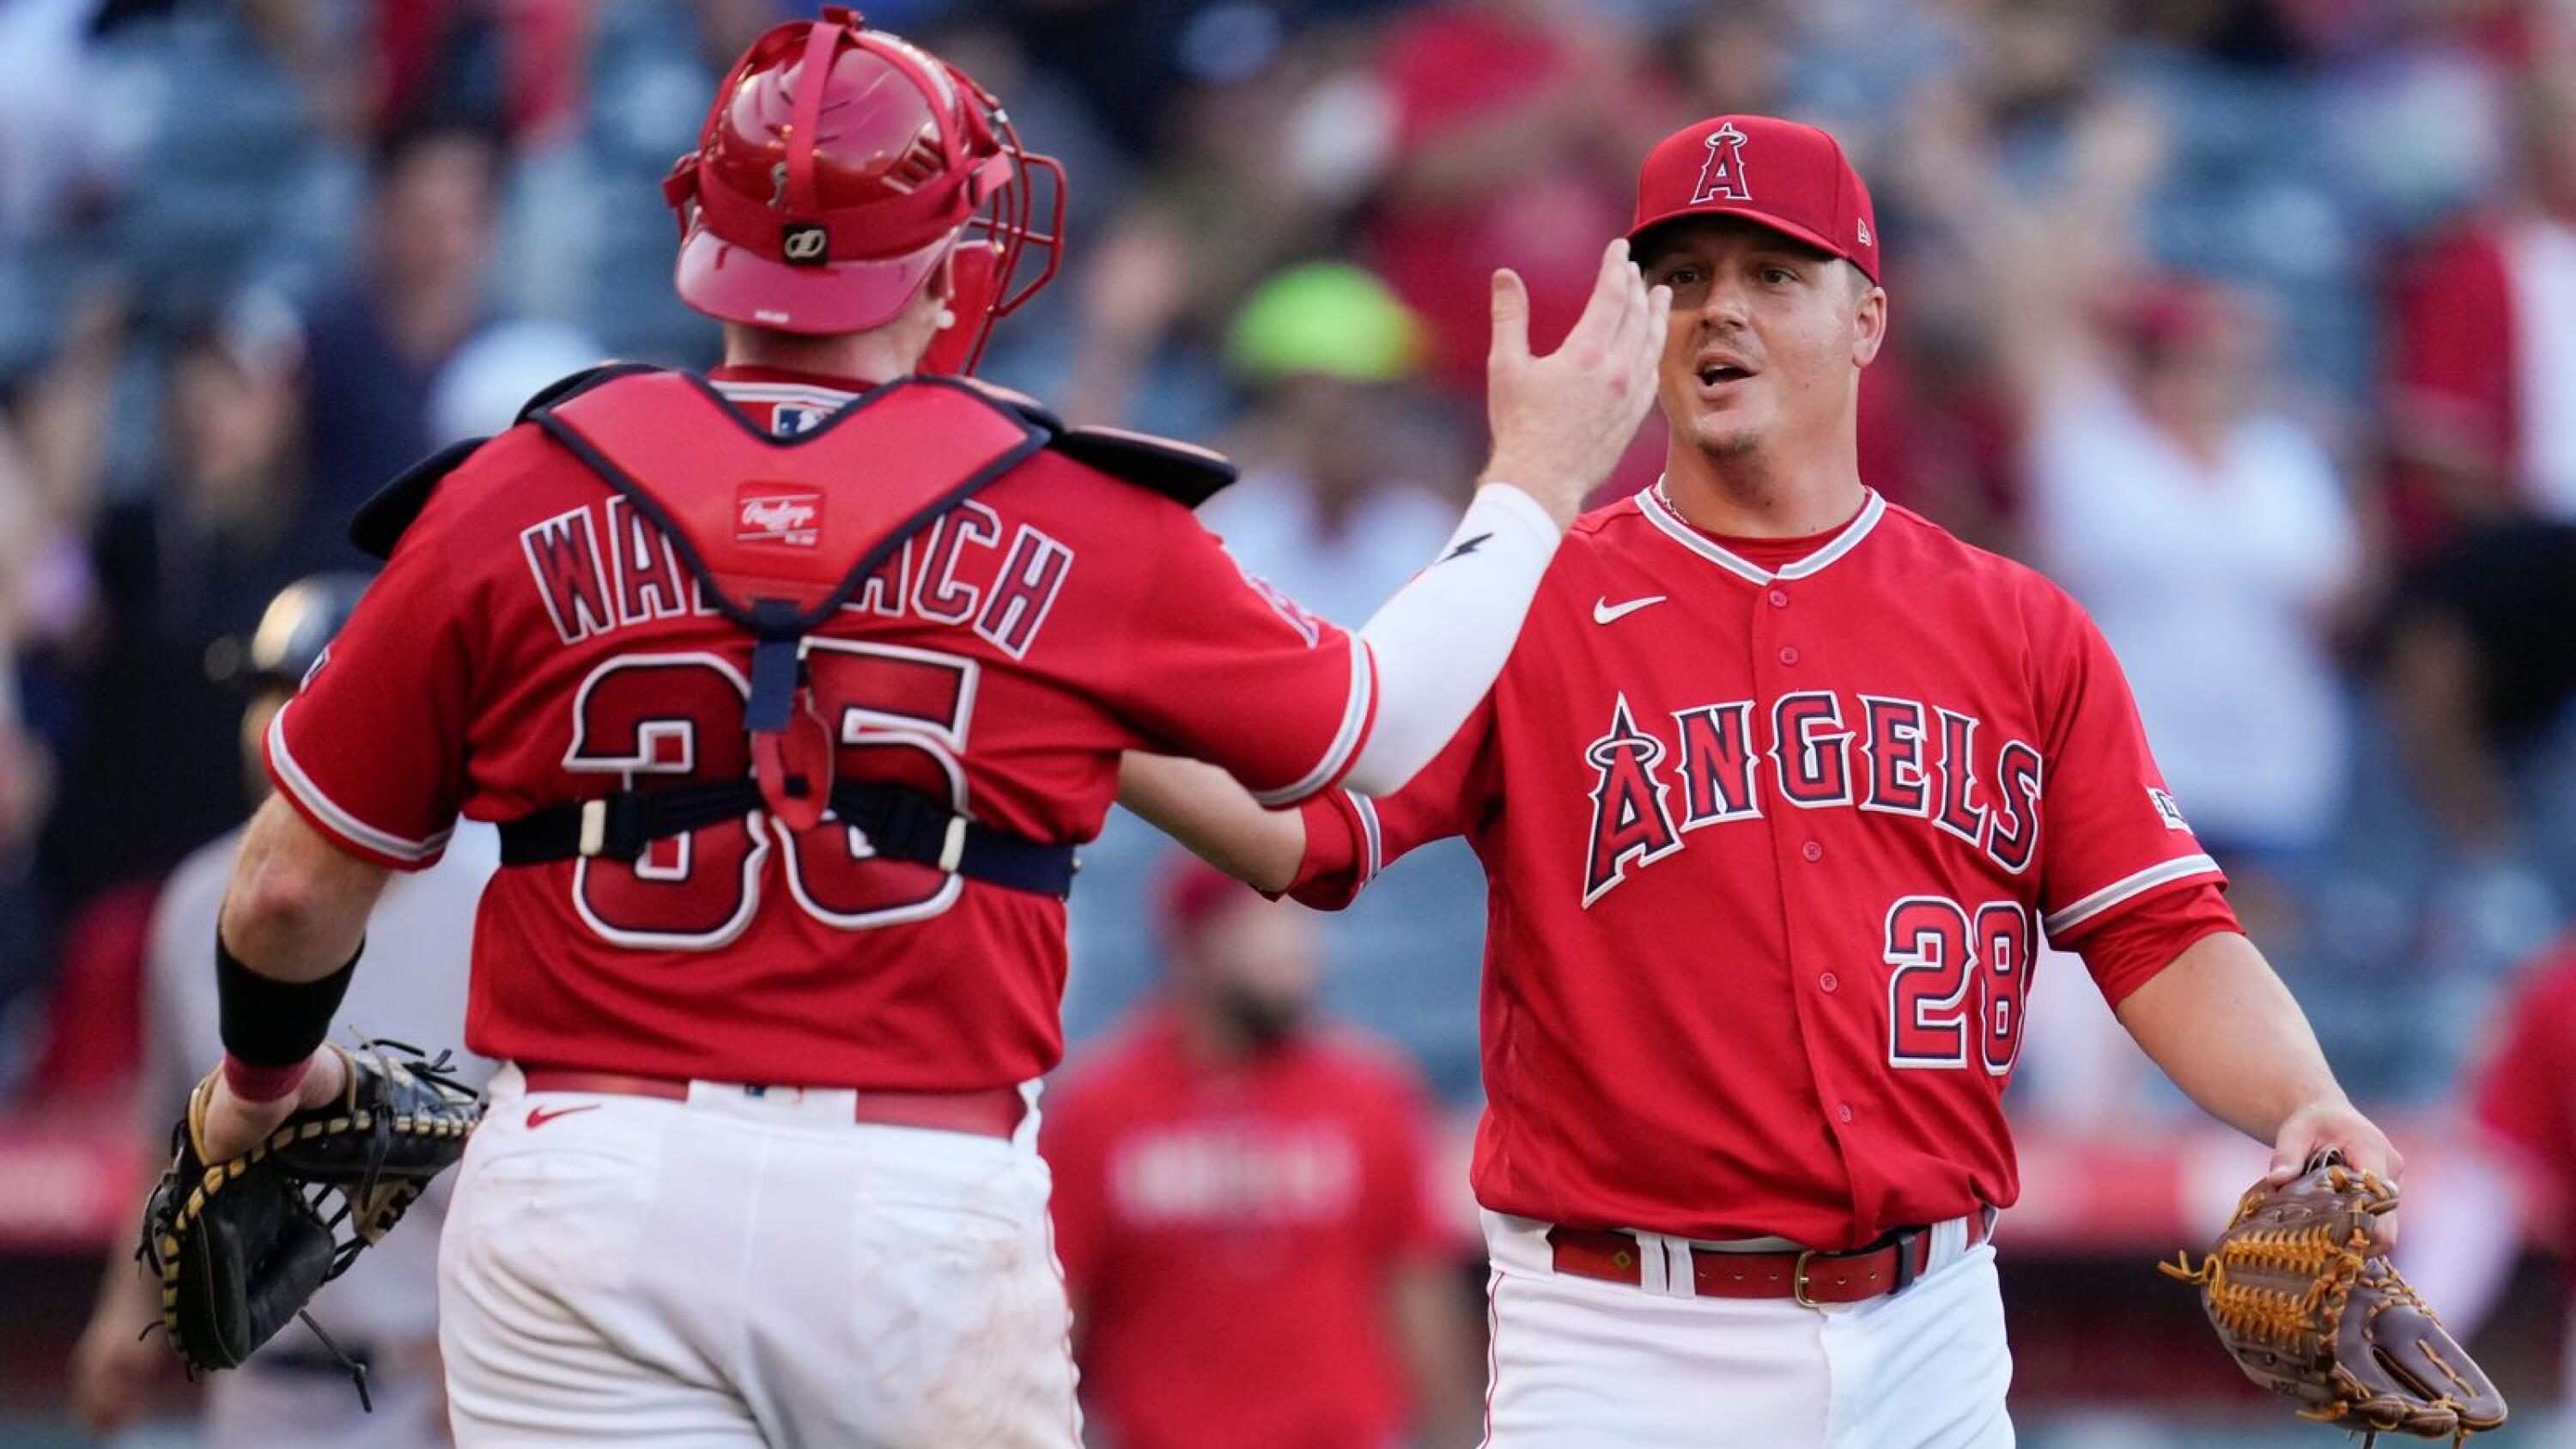 Angels finish sweep of Yankees with 7-3 win, finishing New York's 1-5 trip